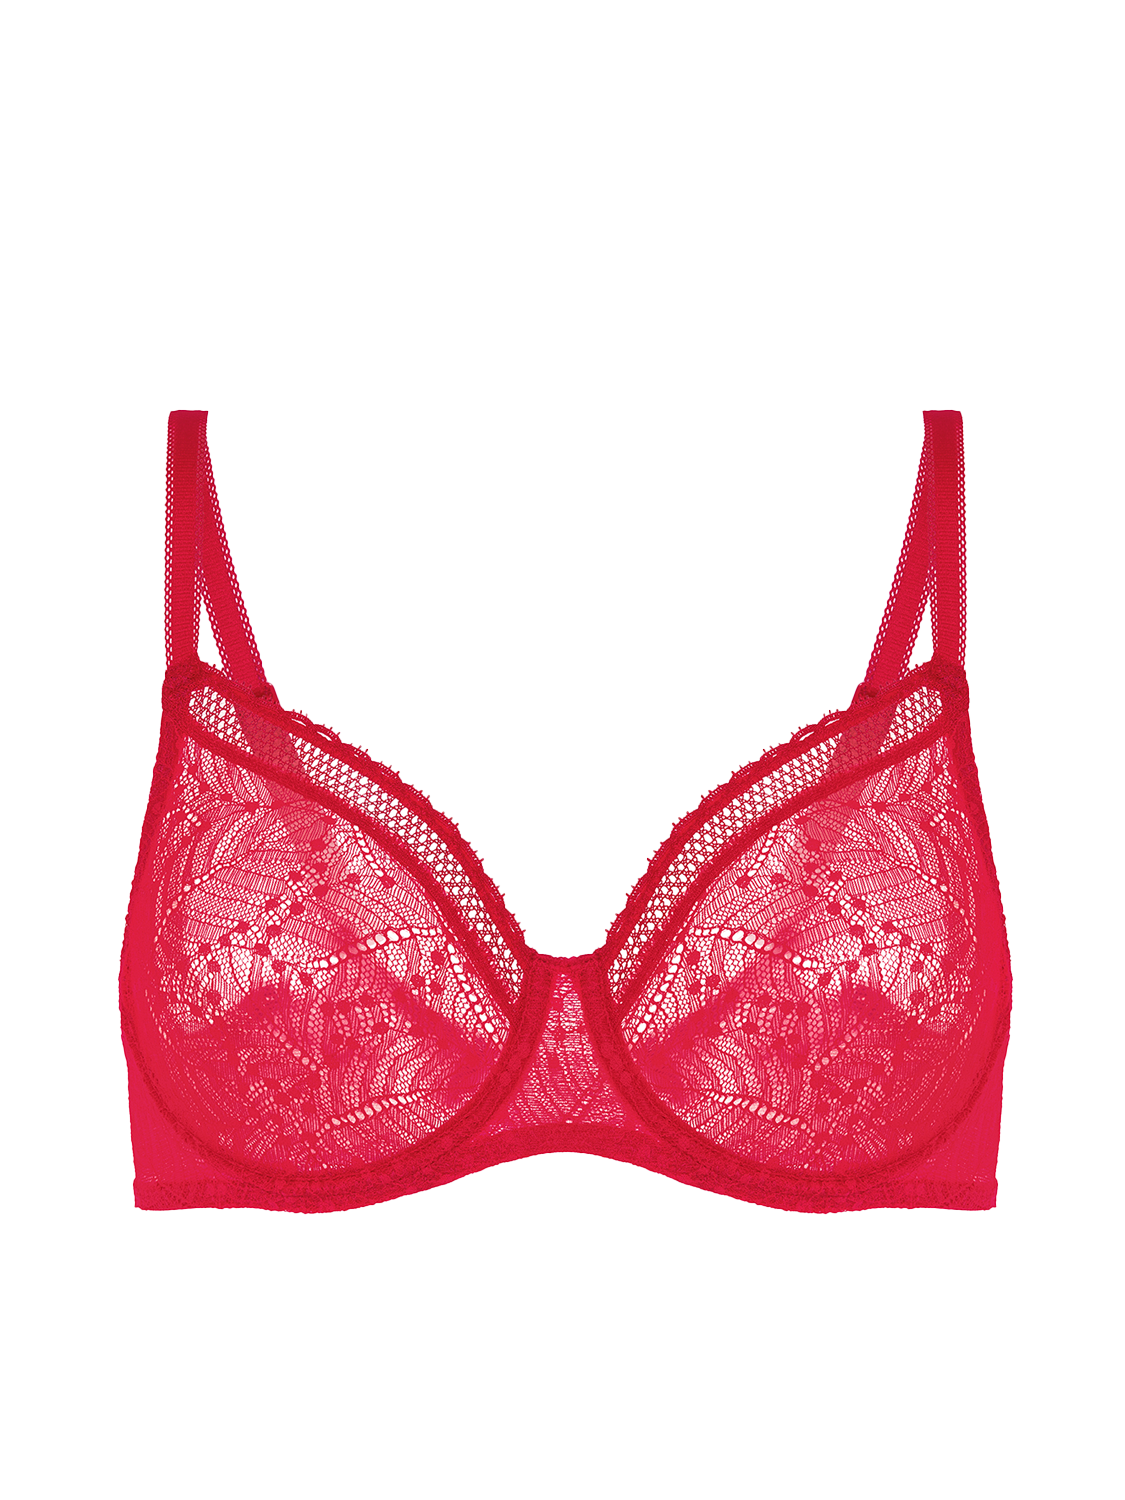 Perfects Be Free Curve It Up Balconette Bra, Pearl, 12D - 18E - Lingerie  Red Dot